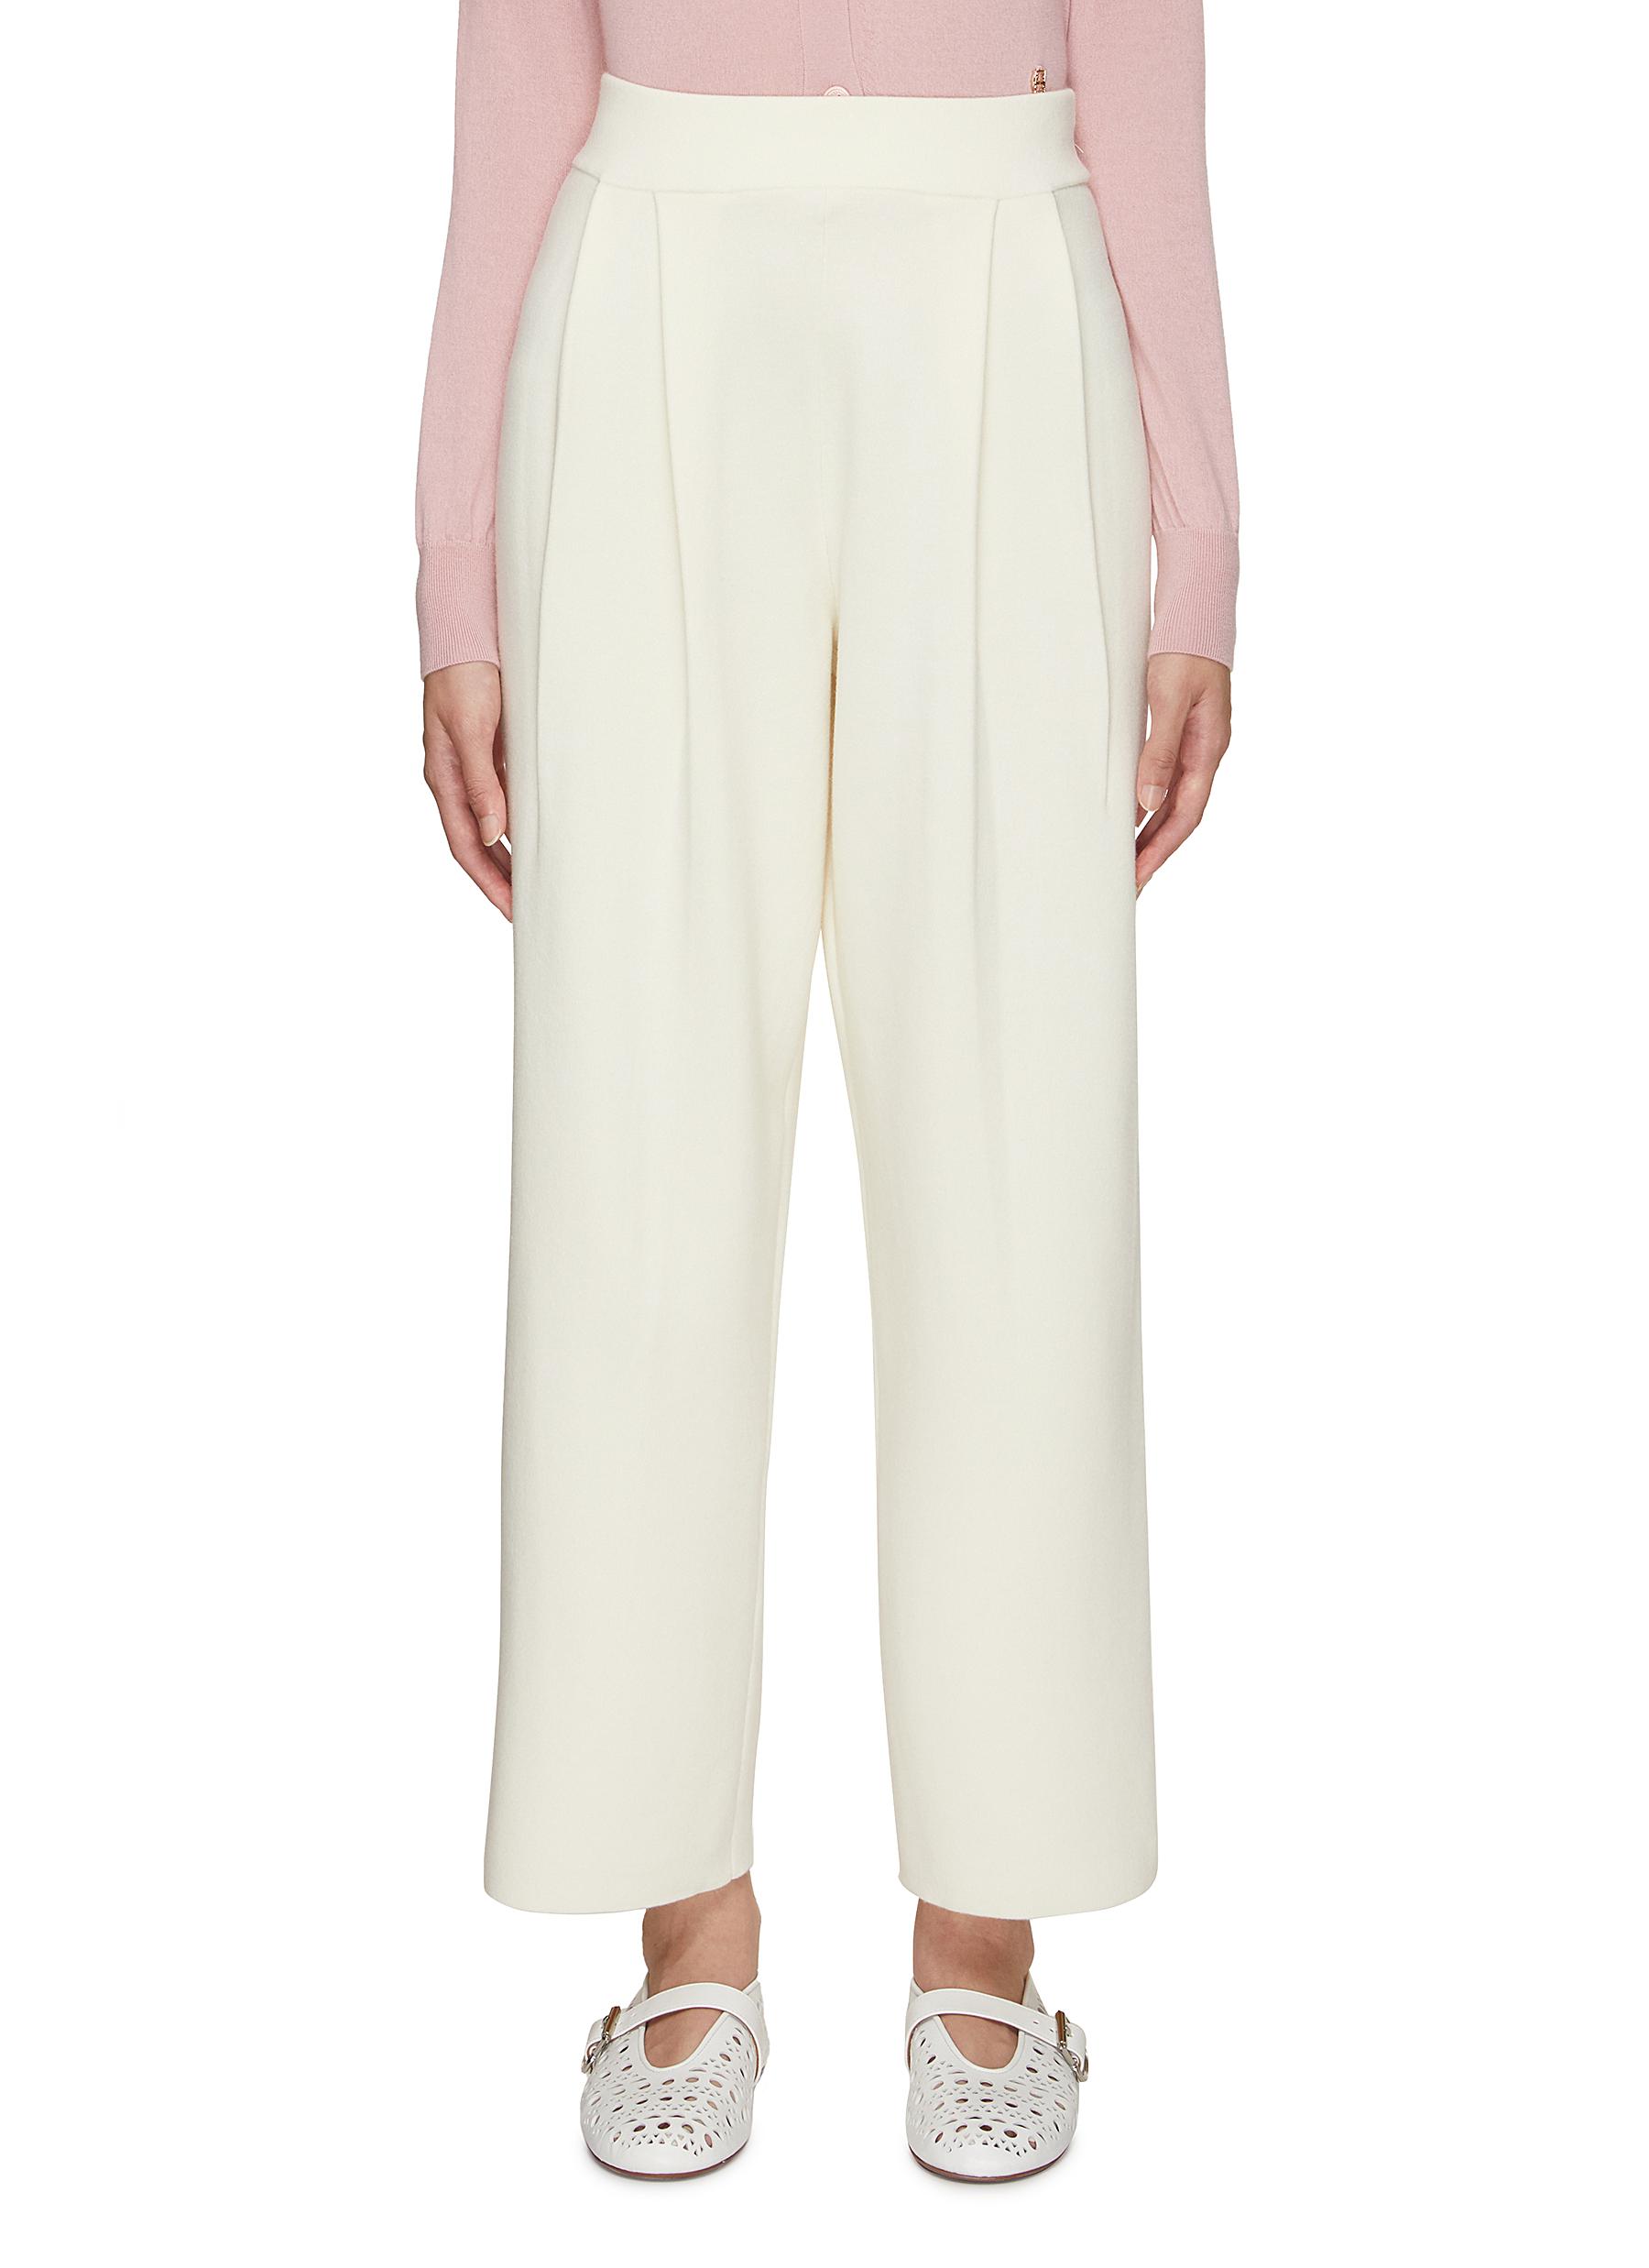 CRUSH COLLECTION Pleated Pants